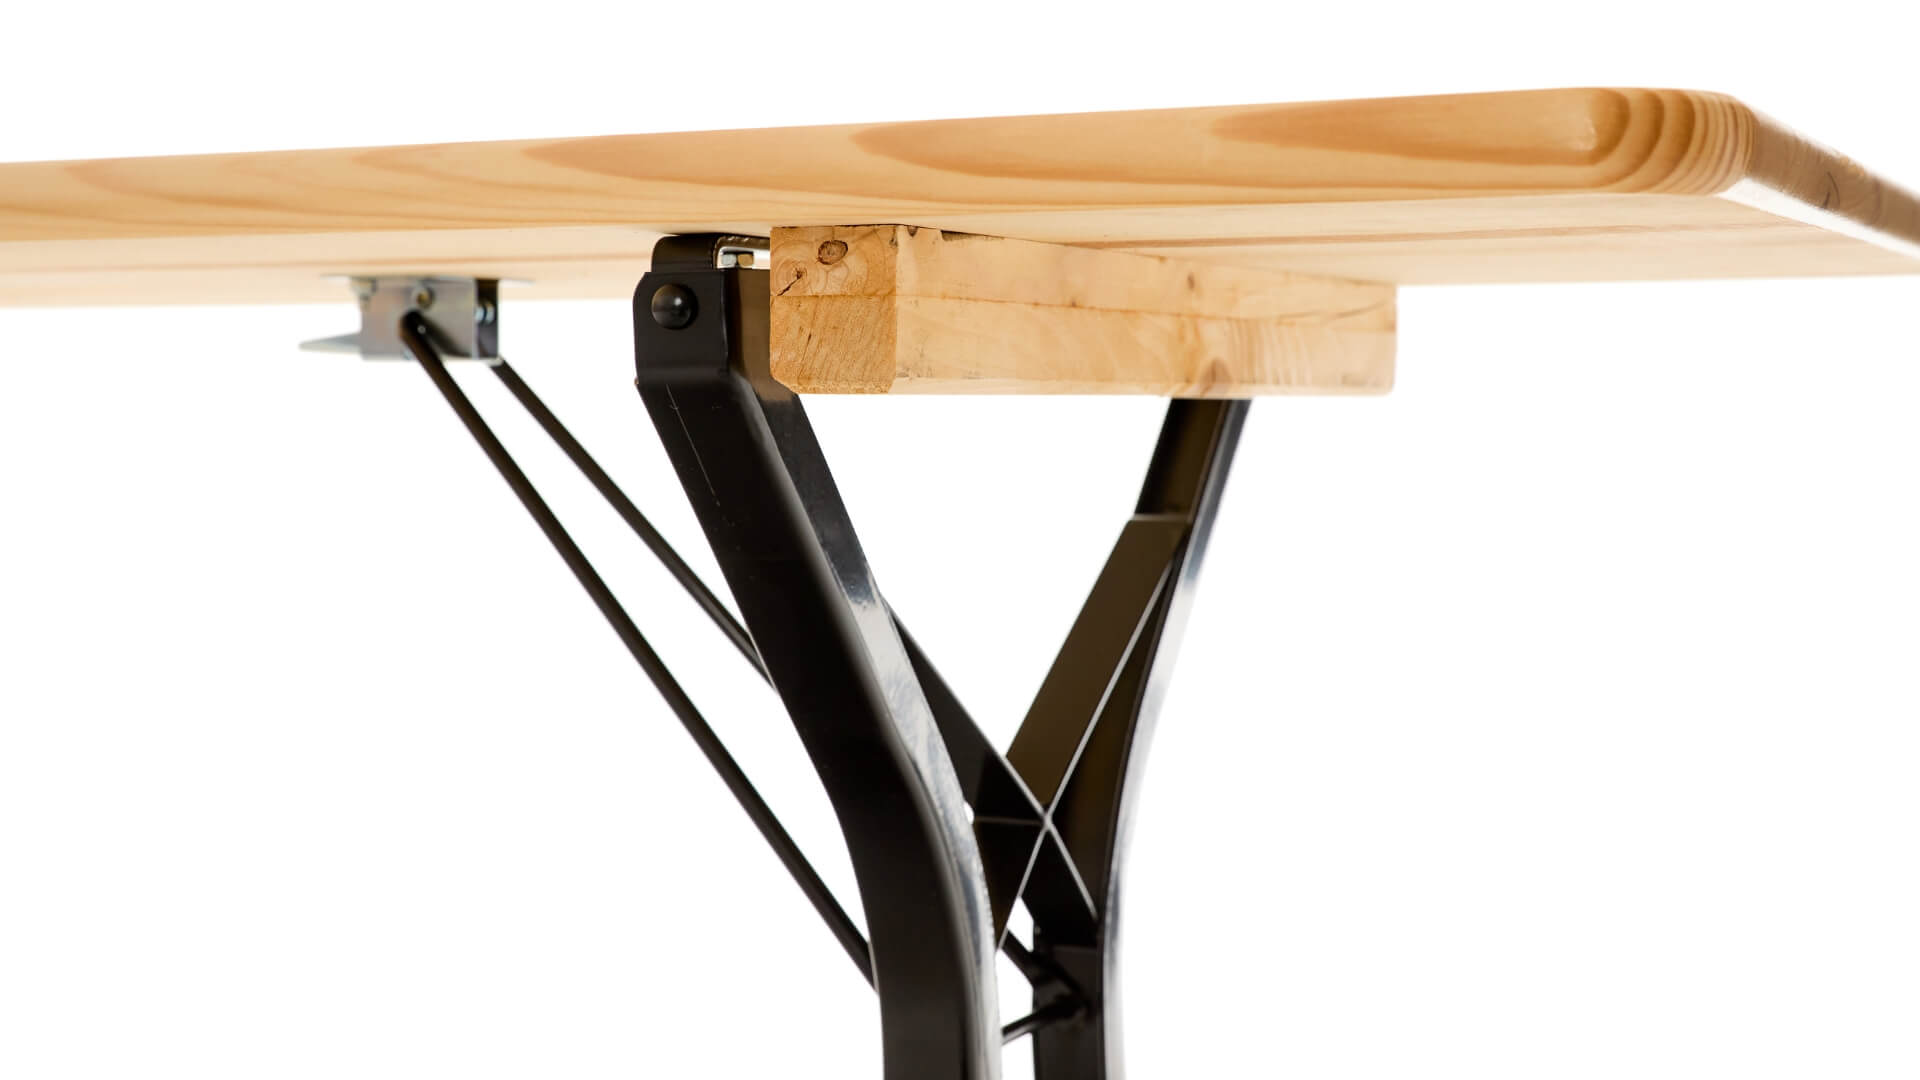 The stacking ledges of the beer garden table set with legroom protect the set during stacking, transportation and disassembly.